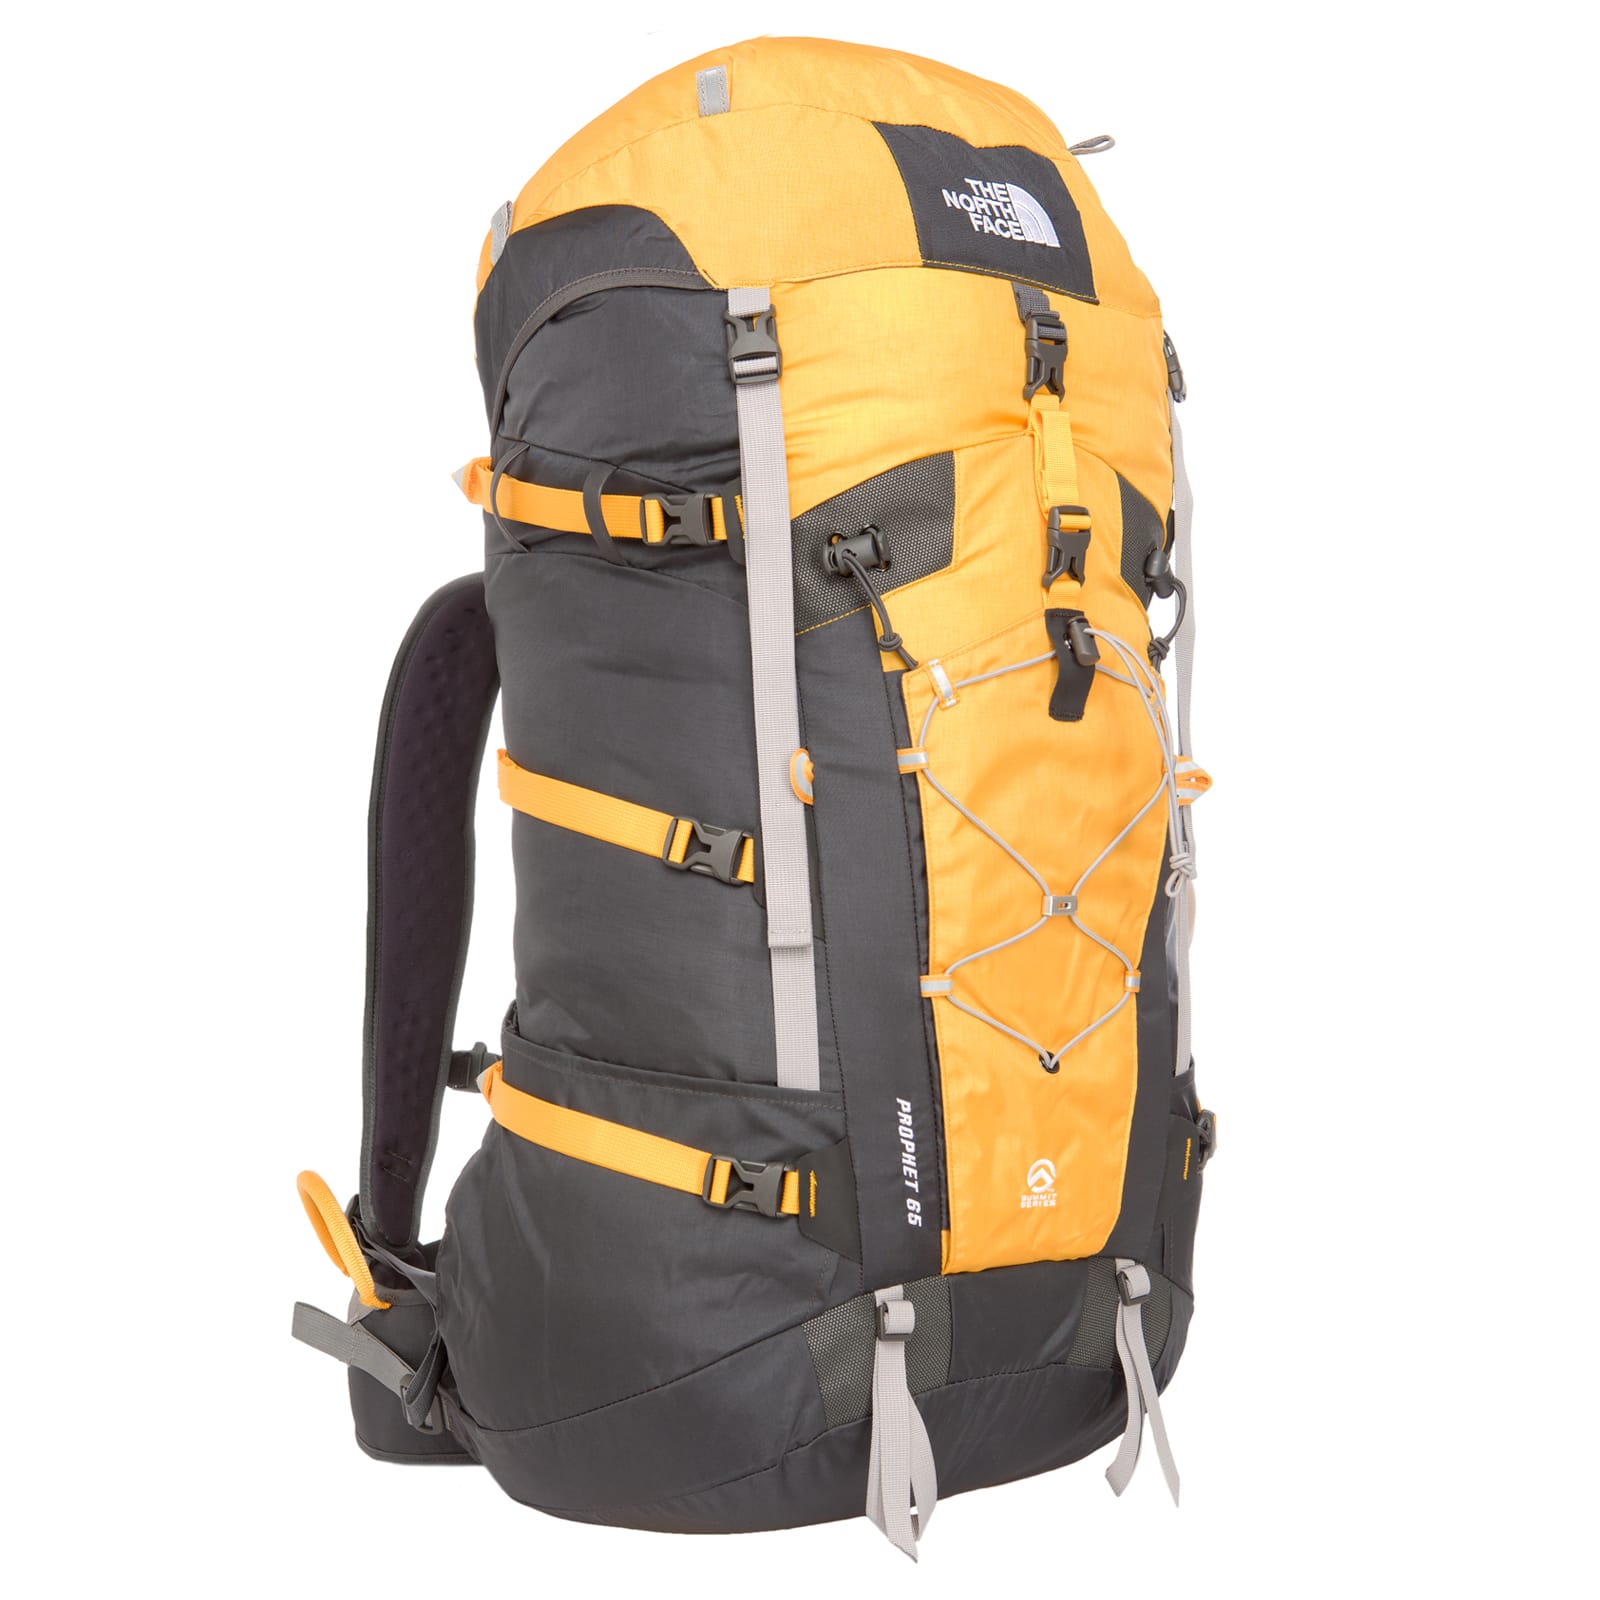 Buy The North Face Prophet 65 from Outnorth